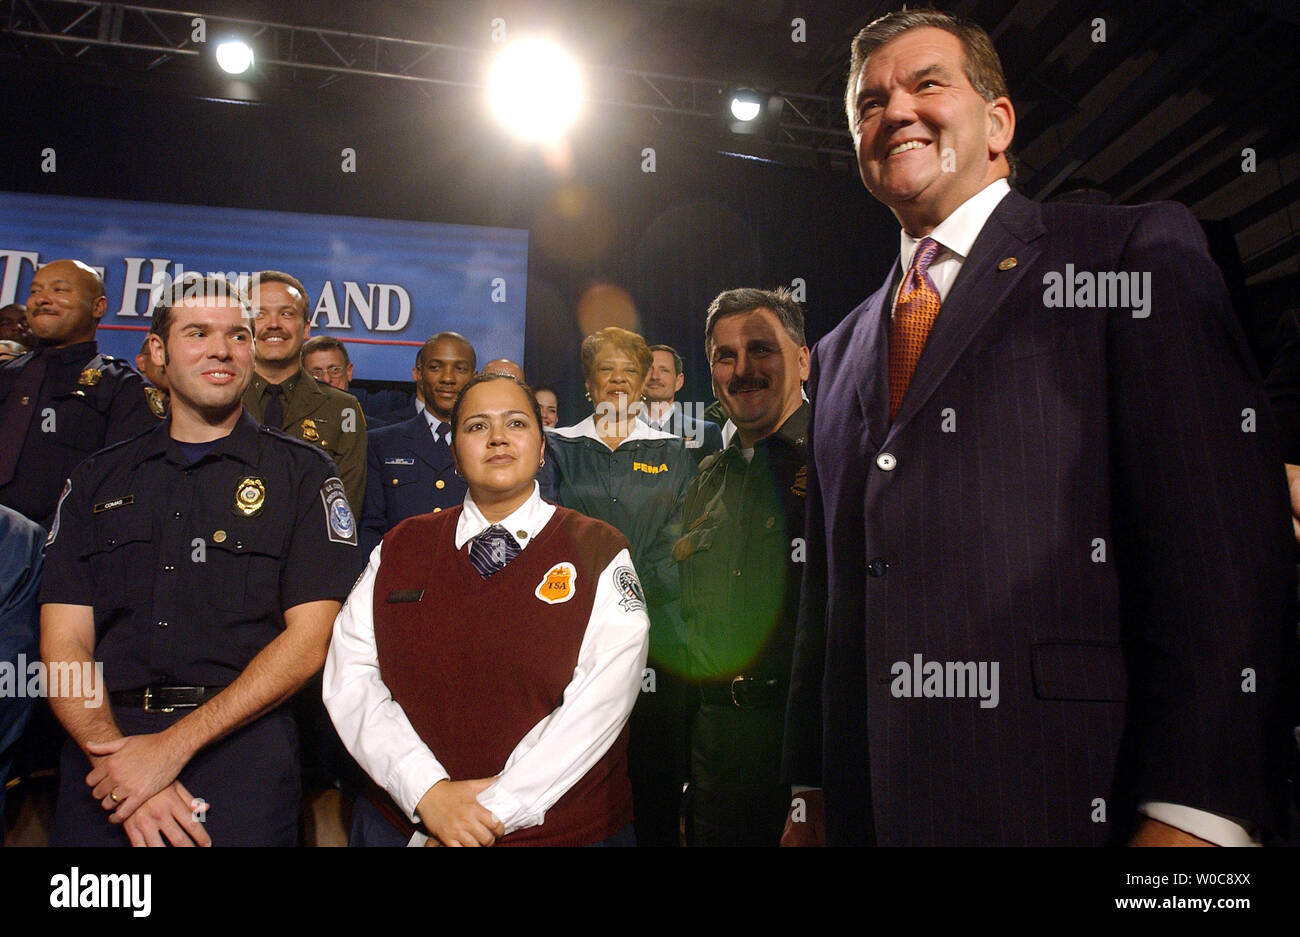 Tom Ridge, secretary of the Department of Homeland Security, and members of his department watch President Bush shake hands with the crown after Bush signed the Homeland Security Appropriations Act into law at the department' headquarters in Washington on Oct. 1, 2003.    UPI PHOTO/ROGER L. WOLLENBERG Stock Photo